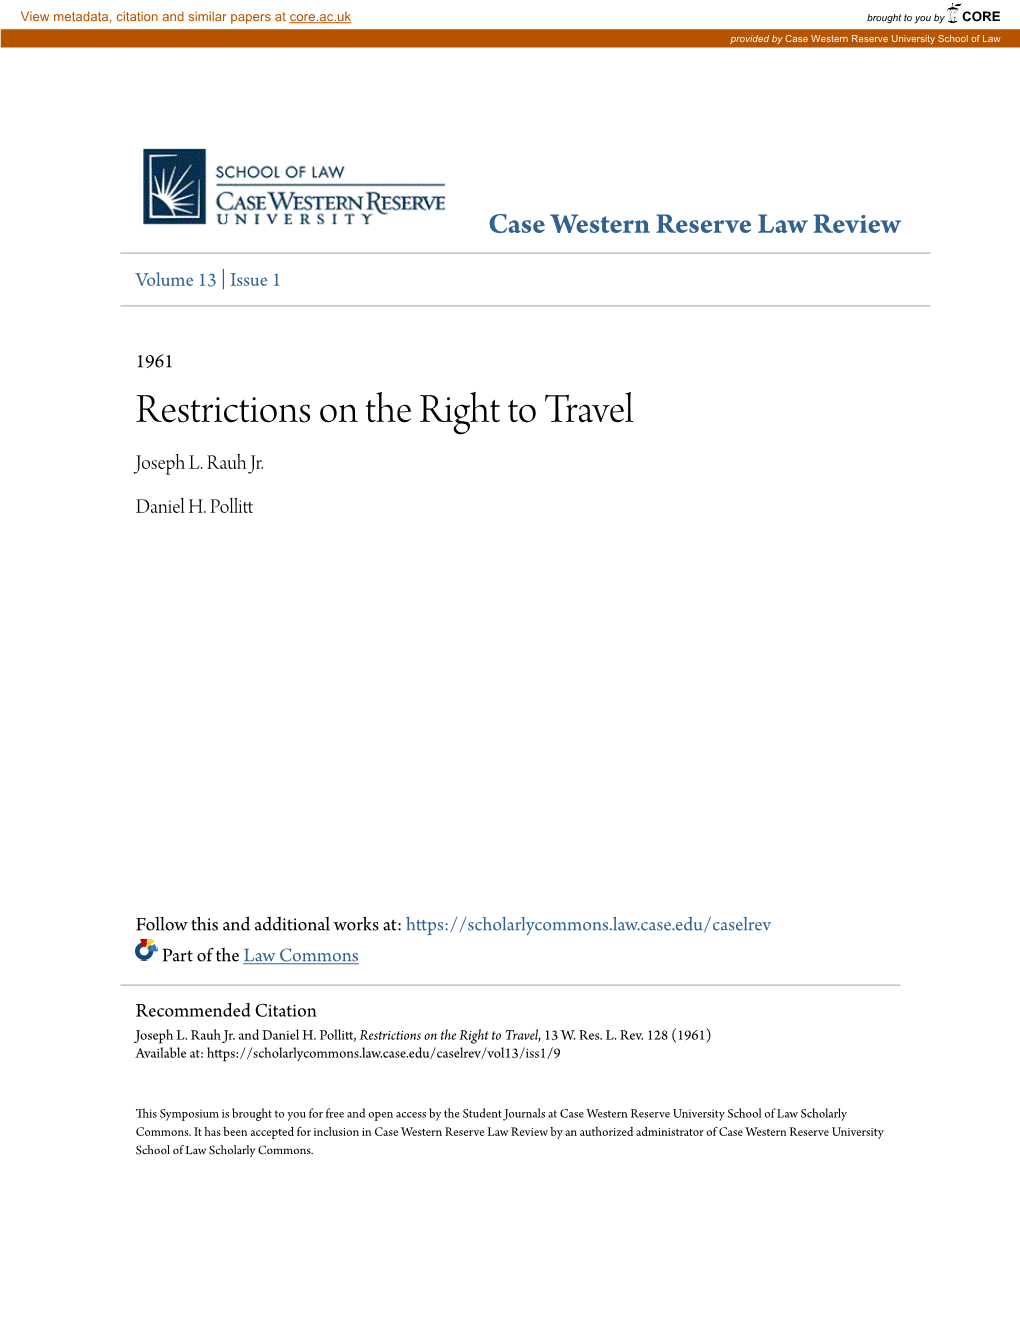 Restrictions on the Right to Travel Joseph L